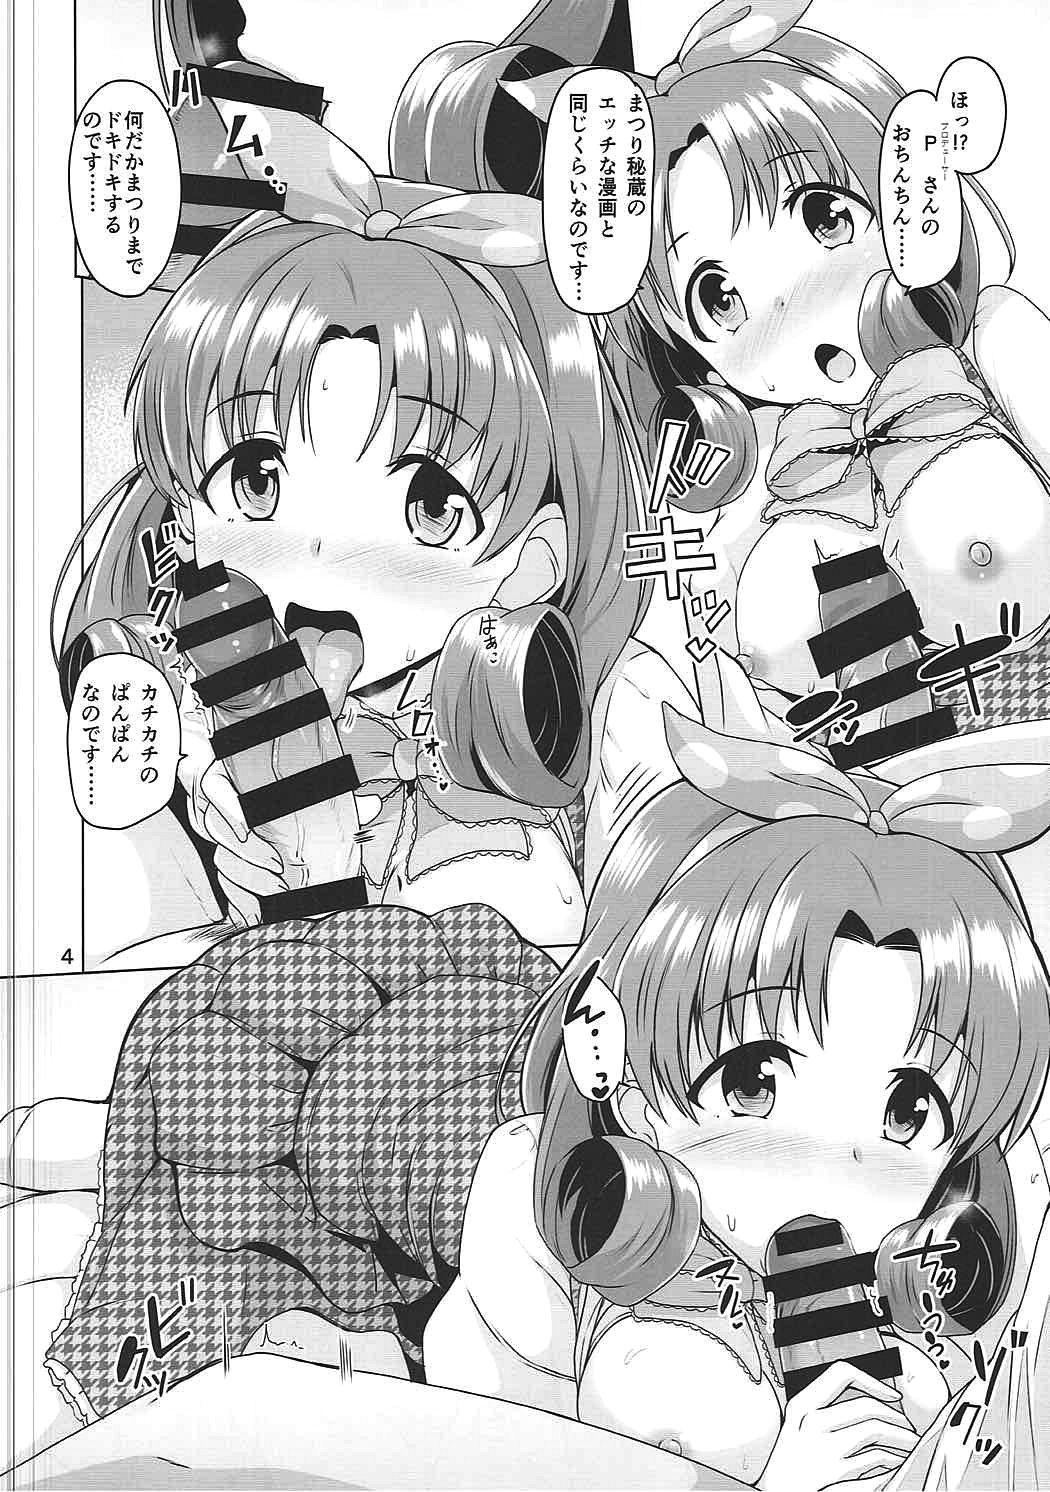 Whipping Princess? or Maria? - The idolmaster Spying - Page 5